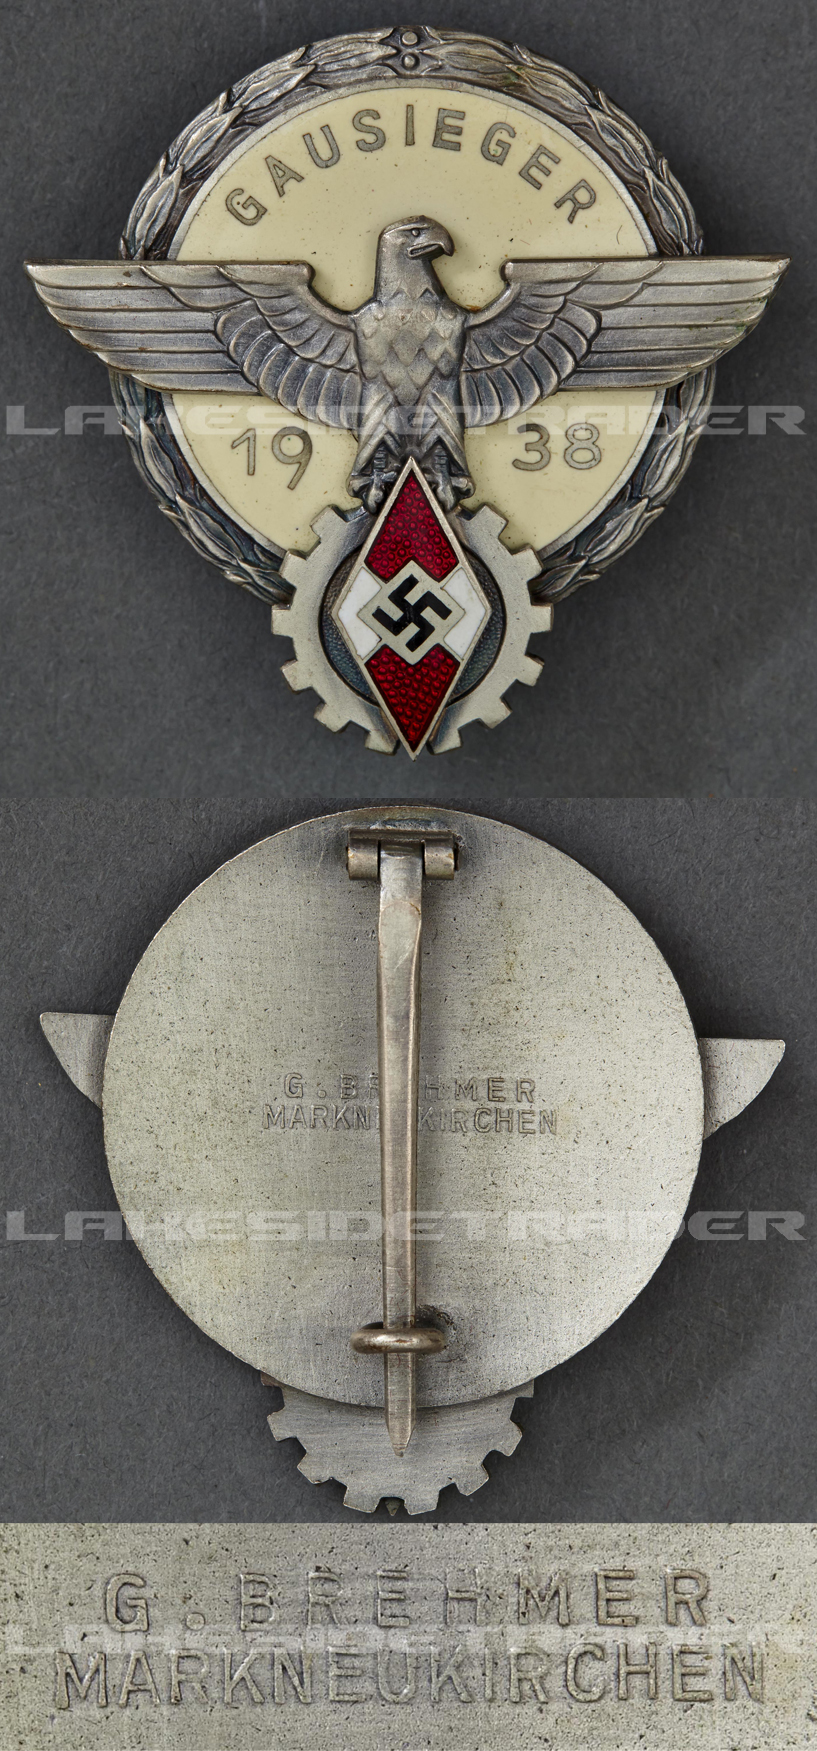 Hitler Youth Gausieger Victors Badge by G. Brehmer 1938